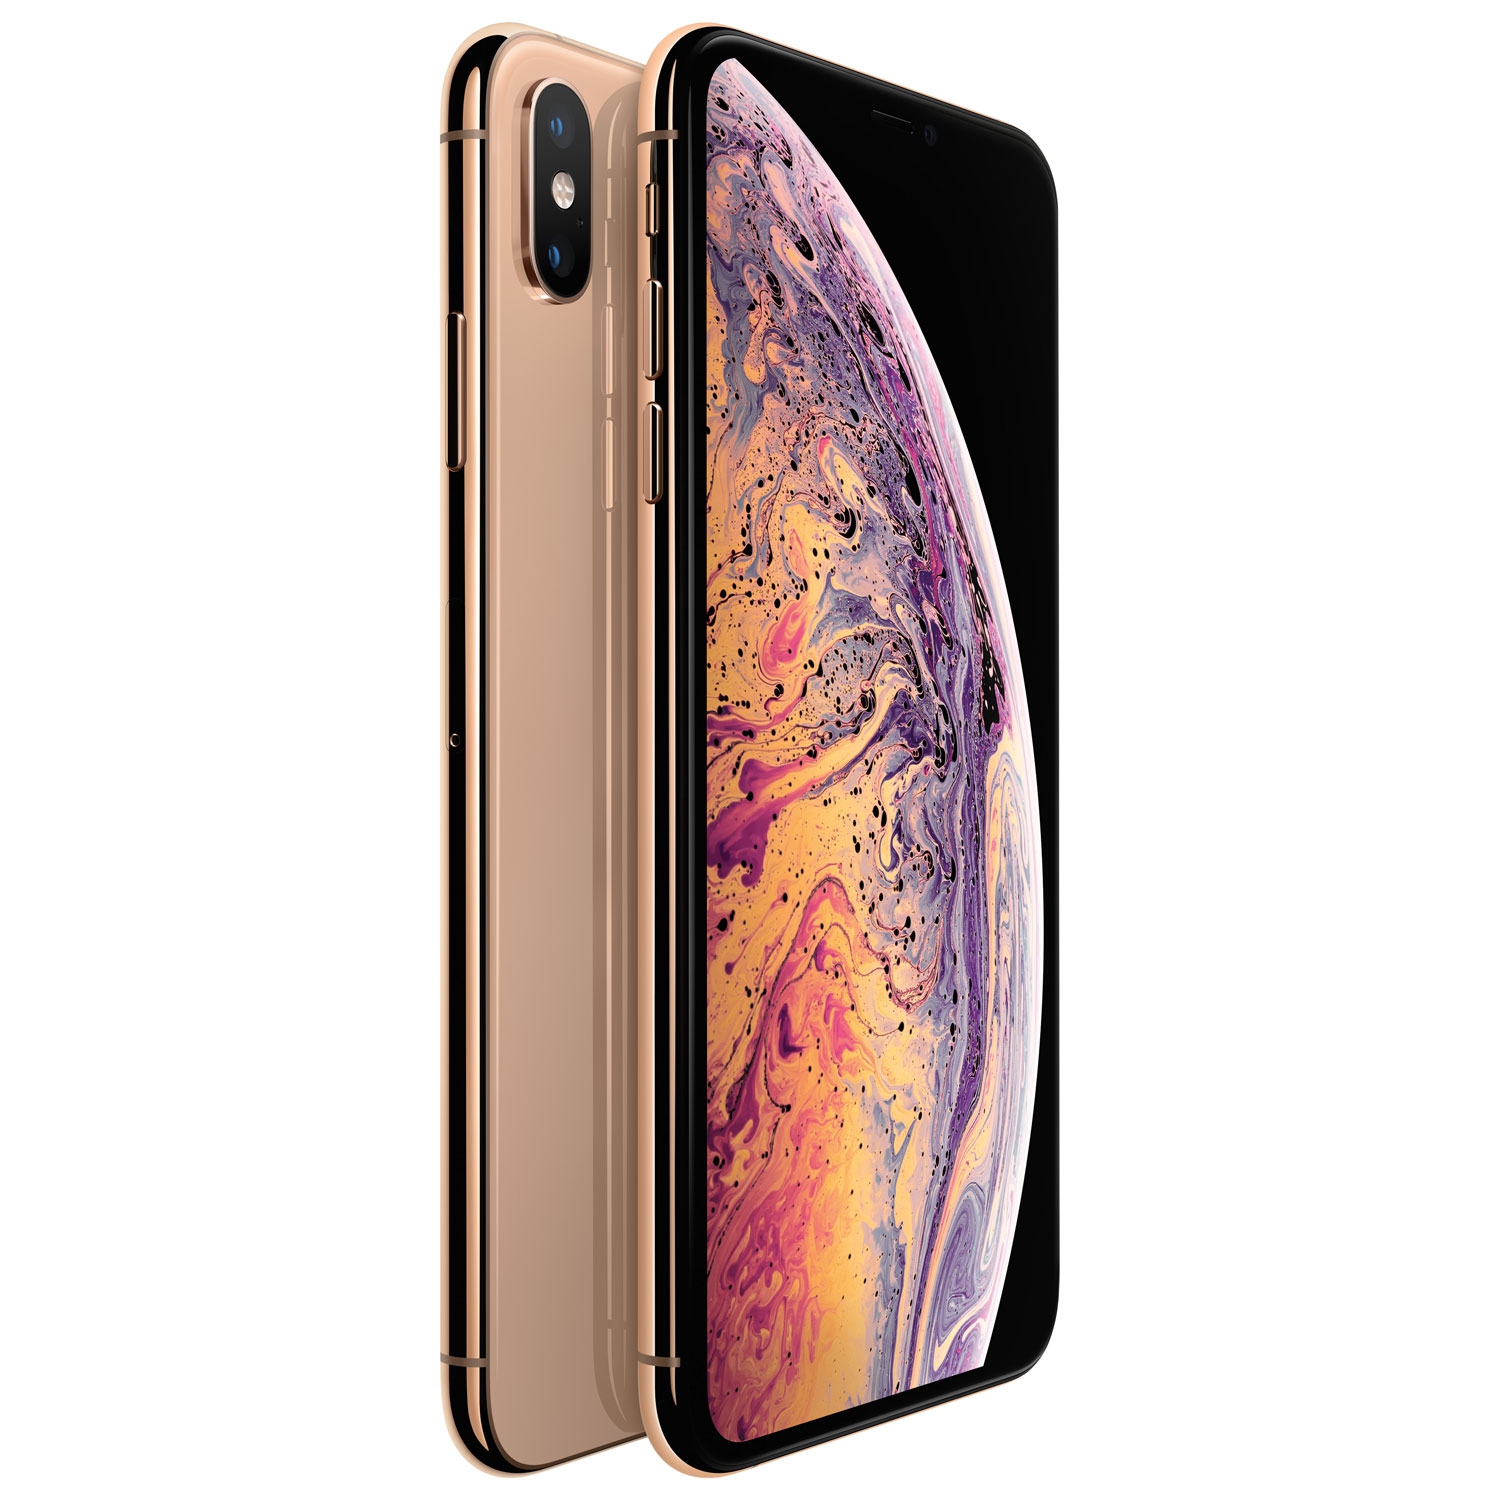 Refurbished (Excellent) - Apple iPhone XS Max 256GB Smartphone - Gold - Unlocked - Certified Refurbished